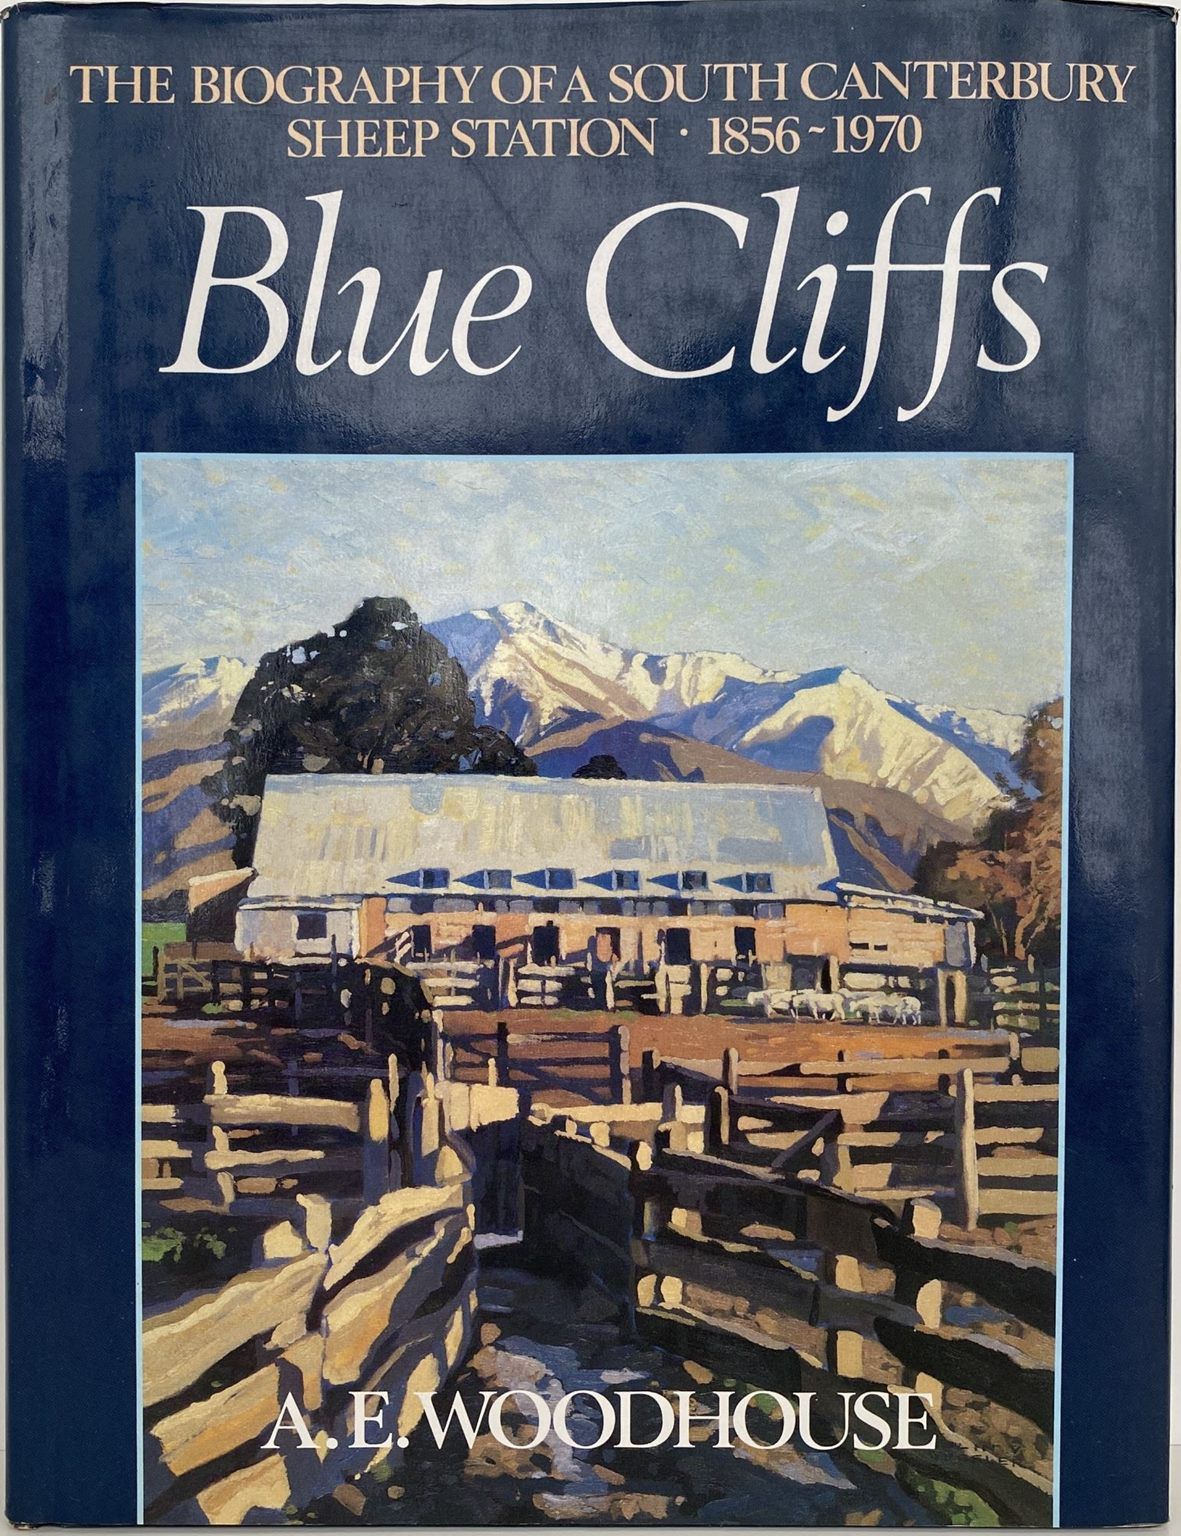 BLUE CLIFFS: The Biography of a South Canterbury Sheep Station 1856 - 1970